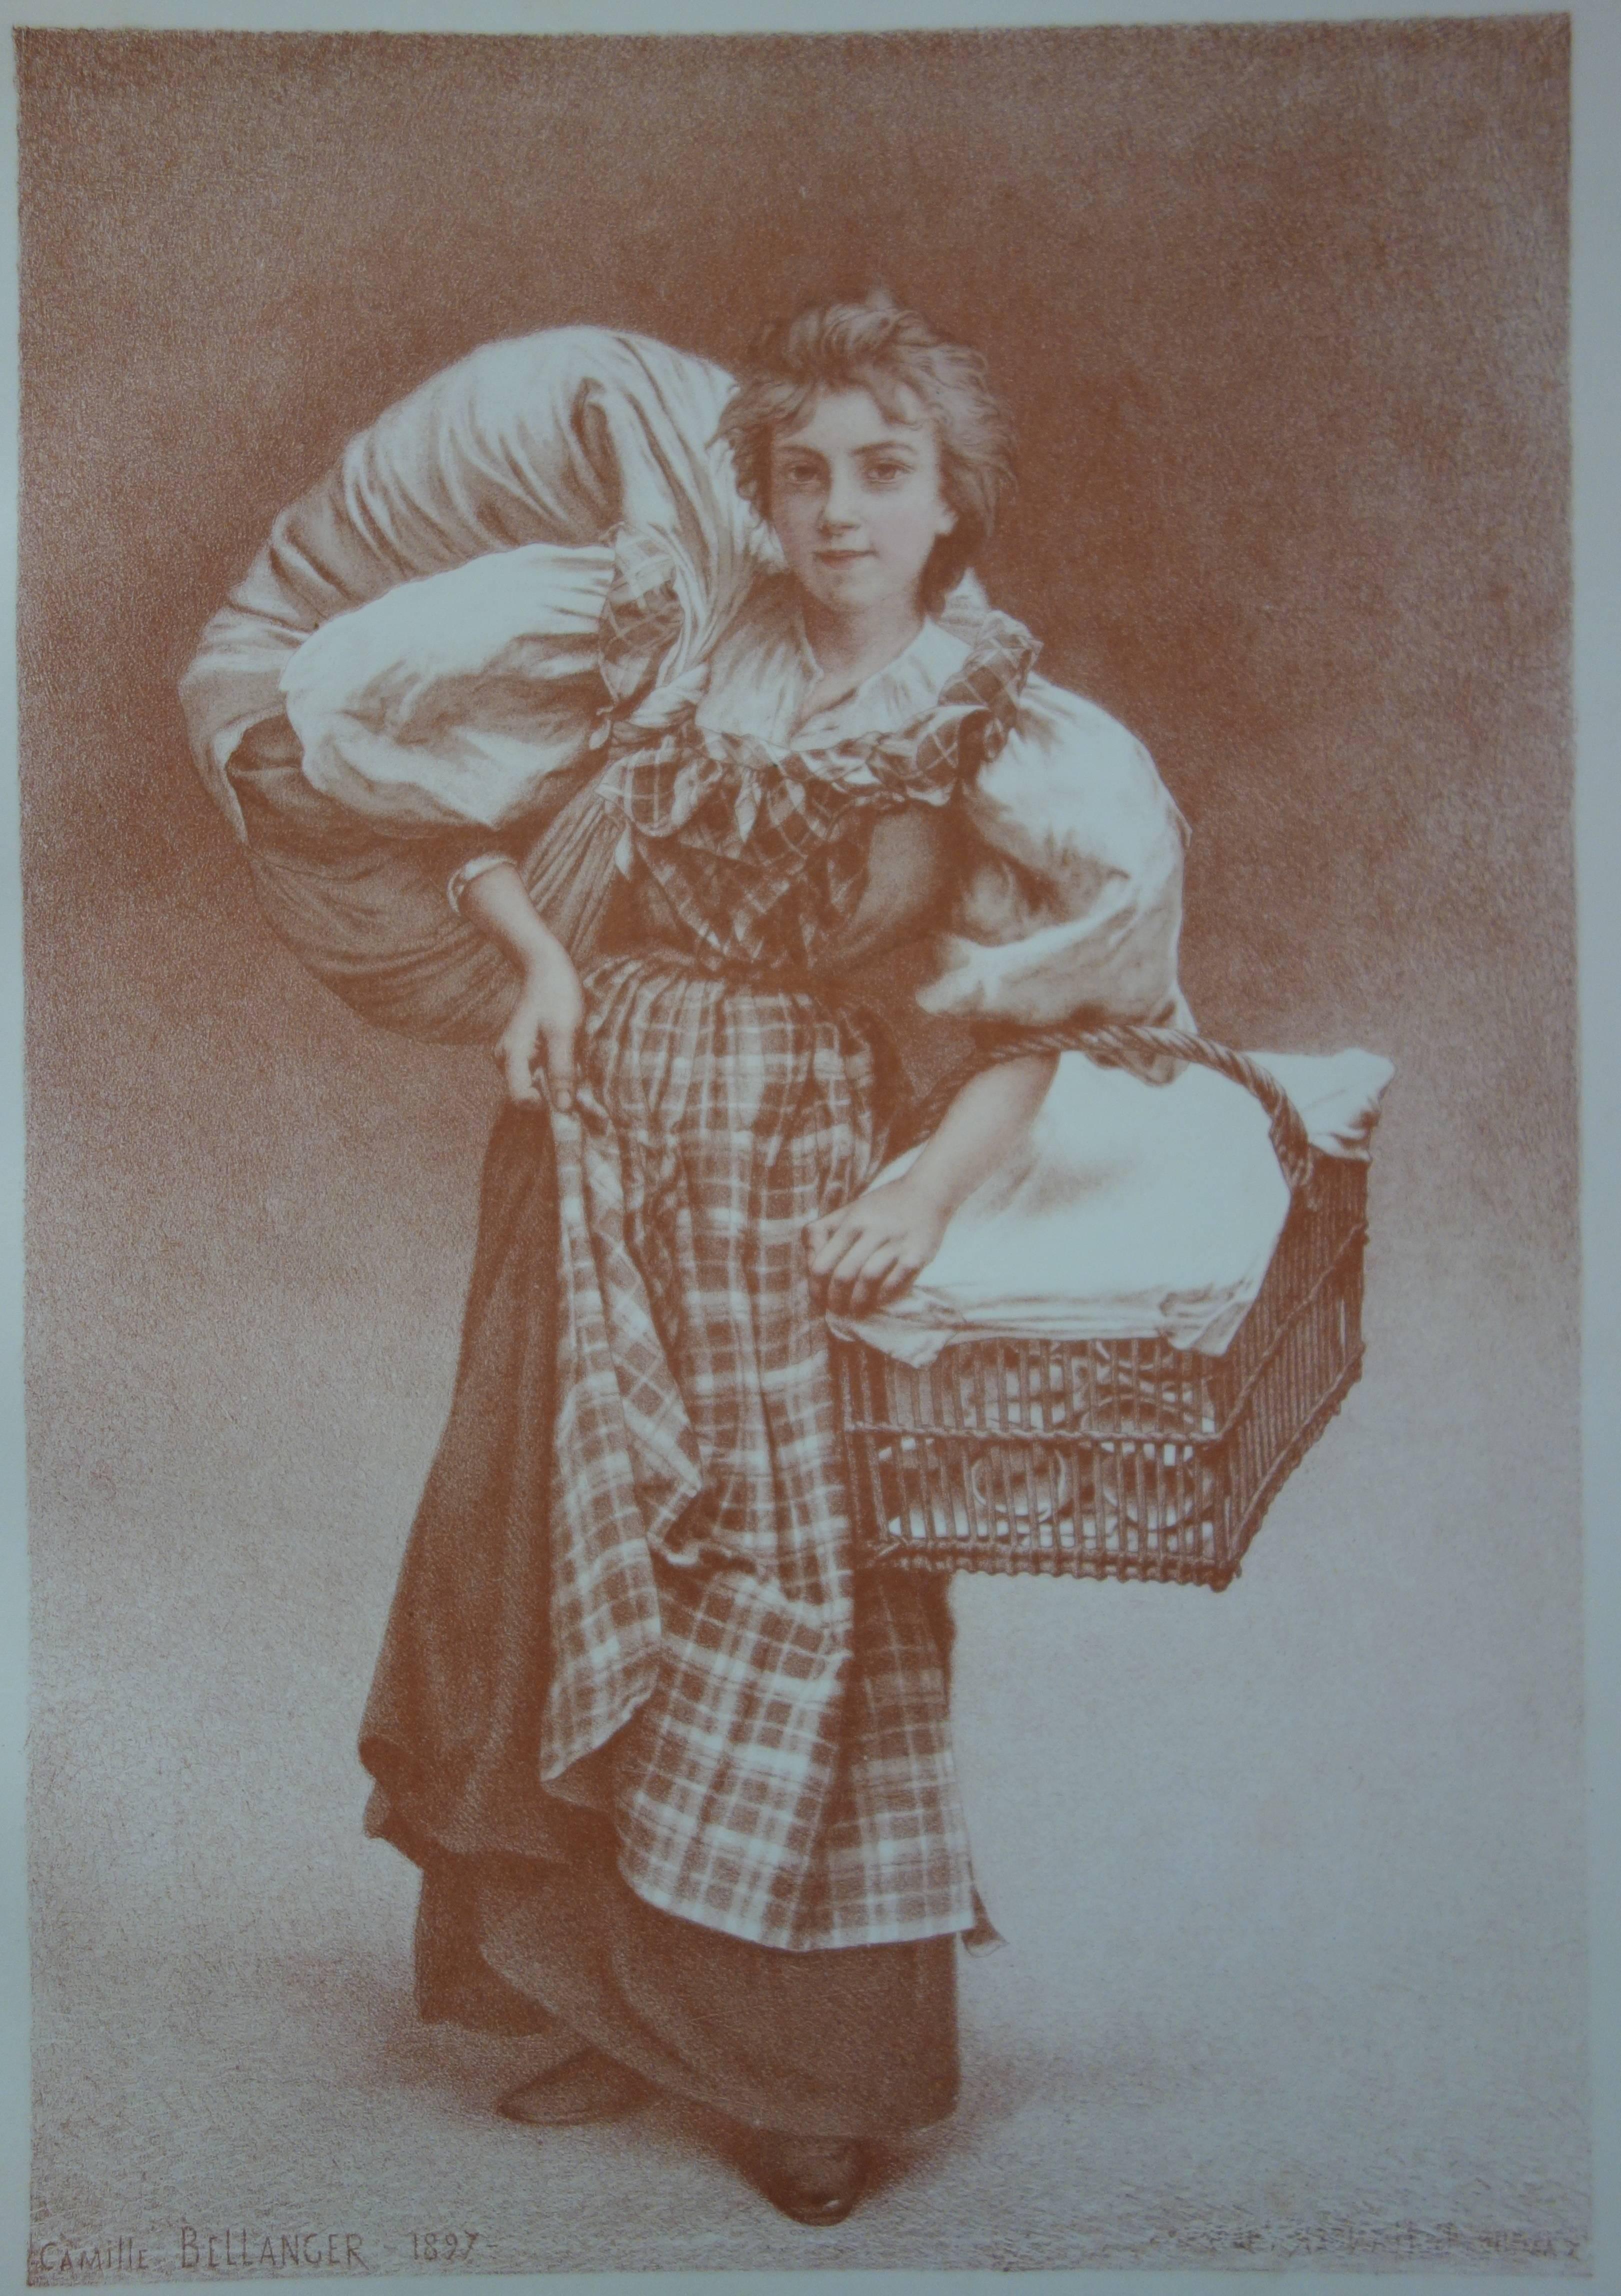 Camille BELLANGER
The Laundress

Original lithograph
Printed signature in the plate
1897/98
Printed on paper Vélin 
Size 40 x 31 cm (c. 16 x 12